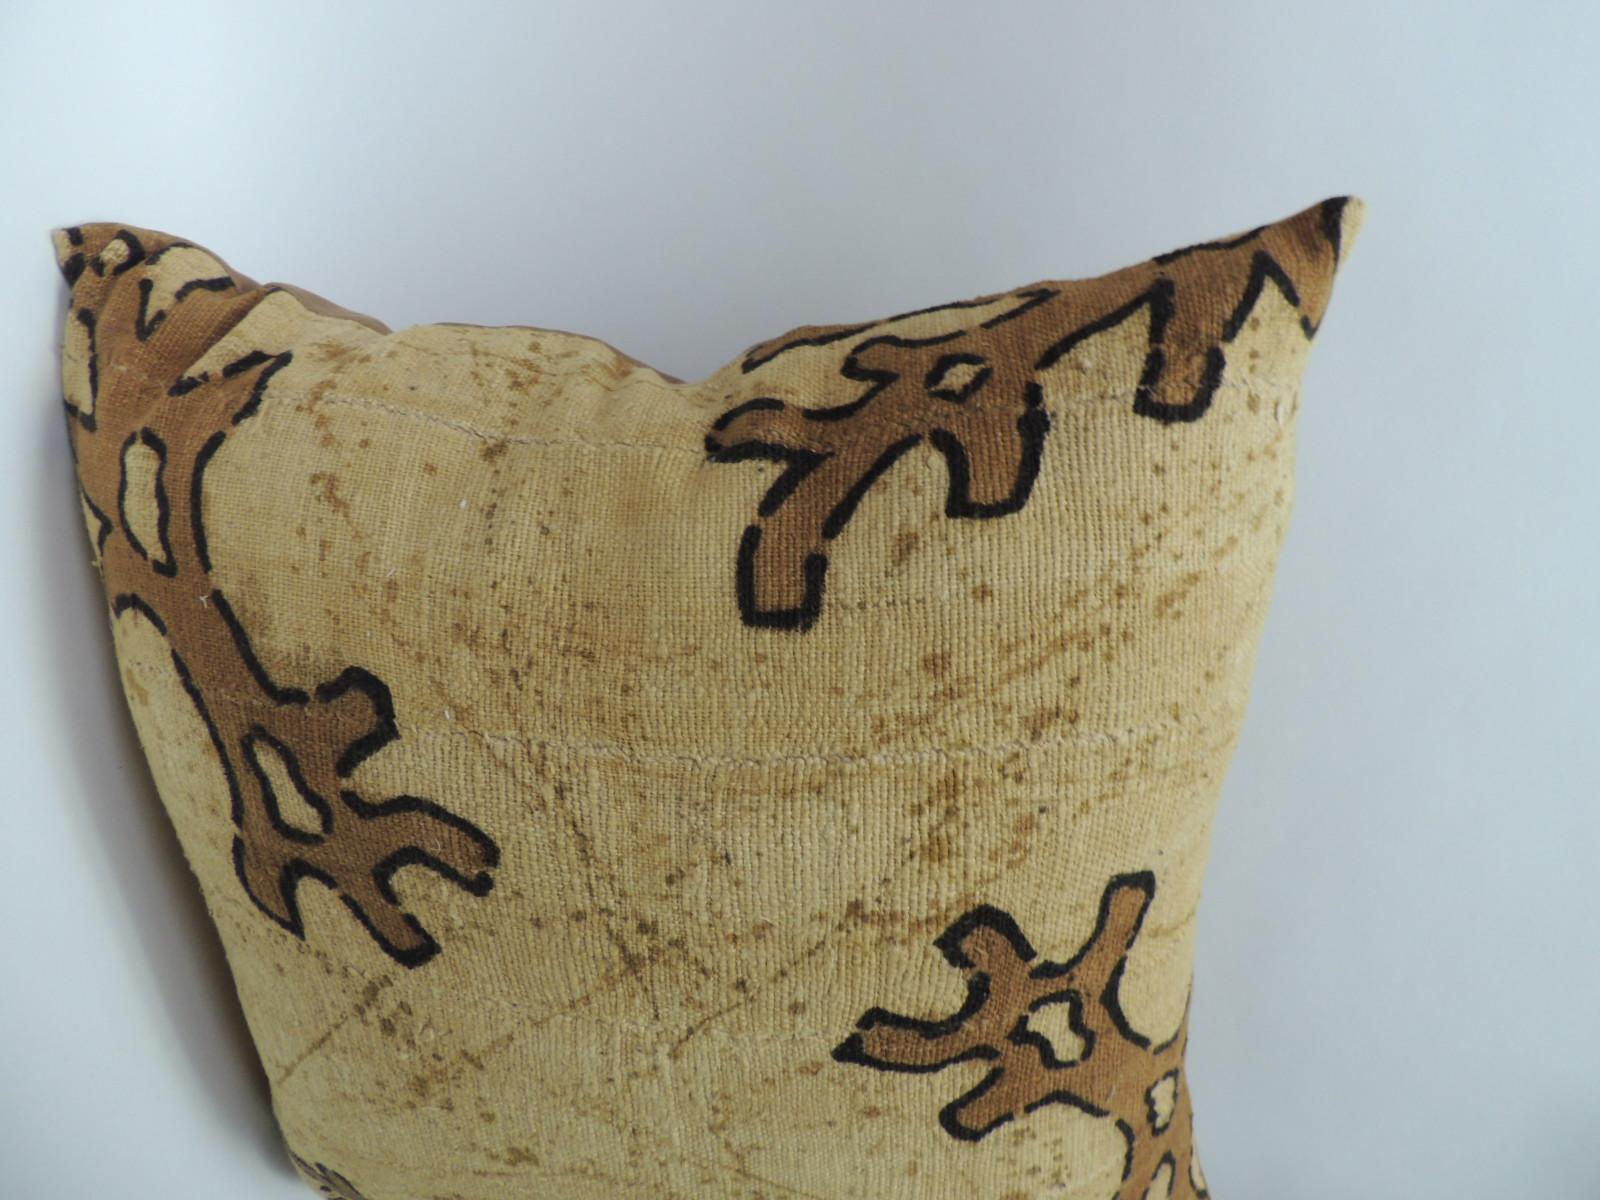 Pair of vintage yellow and brown African mud cloth decorative pillows,
depicting tribal designs in shades of brown, deep yellows.
Cotton backings. Boho-chic style accent pillows.
Decorative pillows handcrafted and designed in the USA.
Closure by